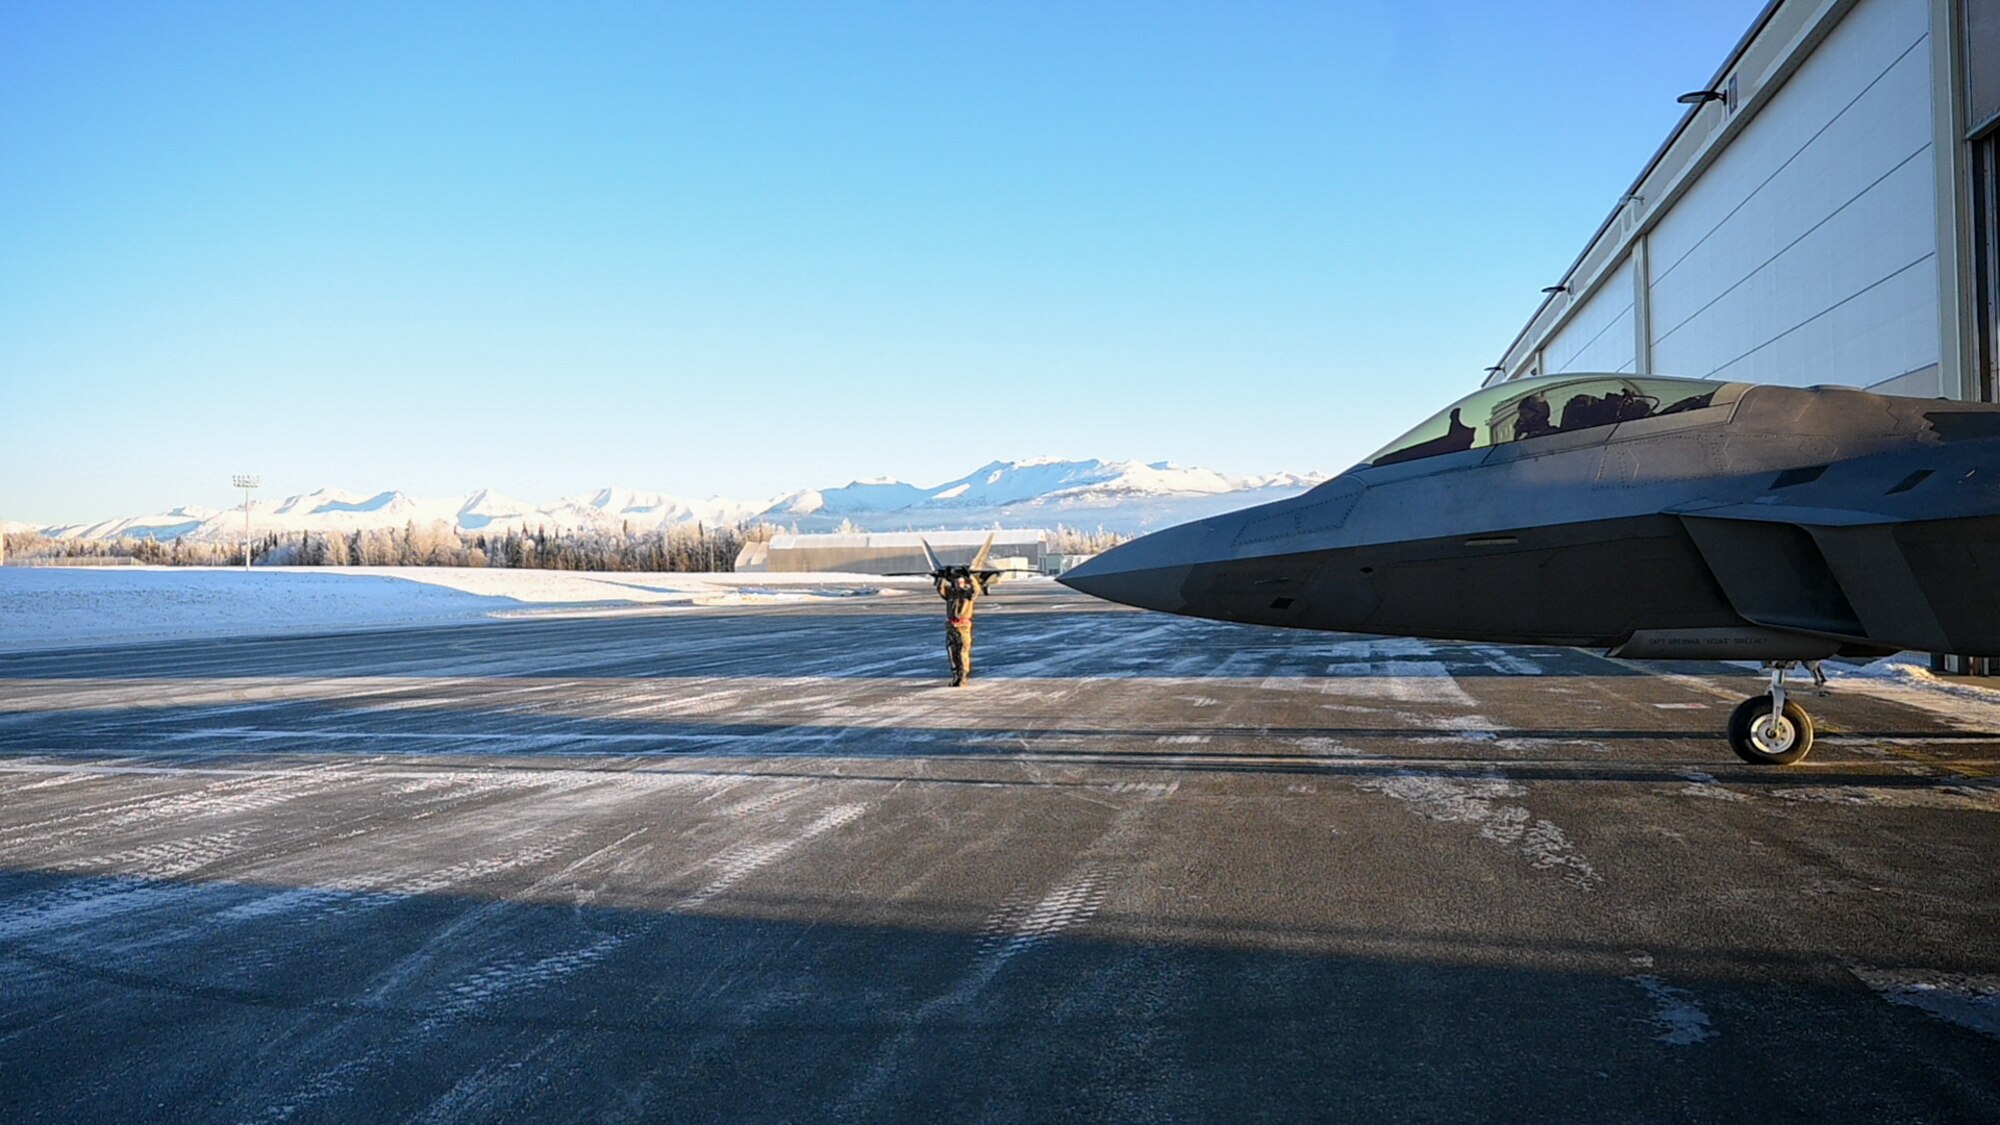 PACAF commander taxis an F-22 Raptor aircraft.